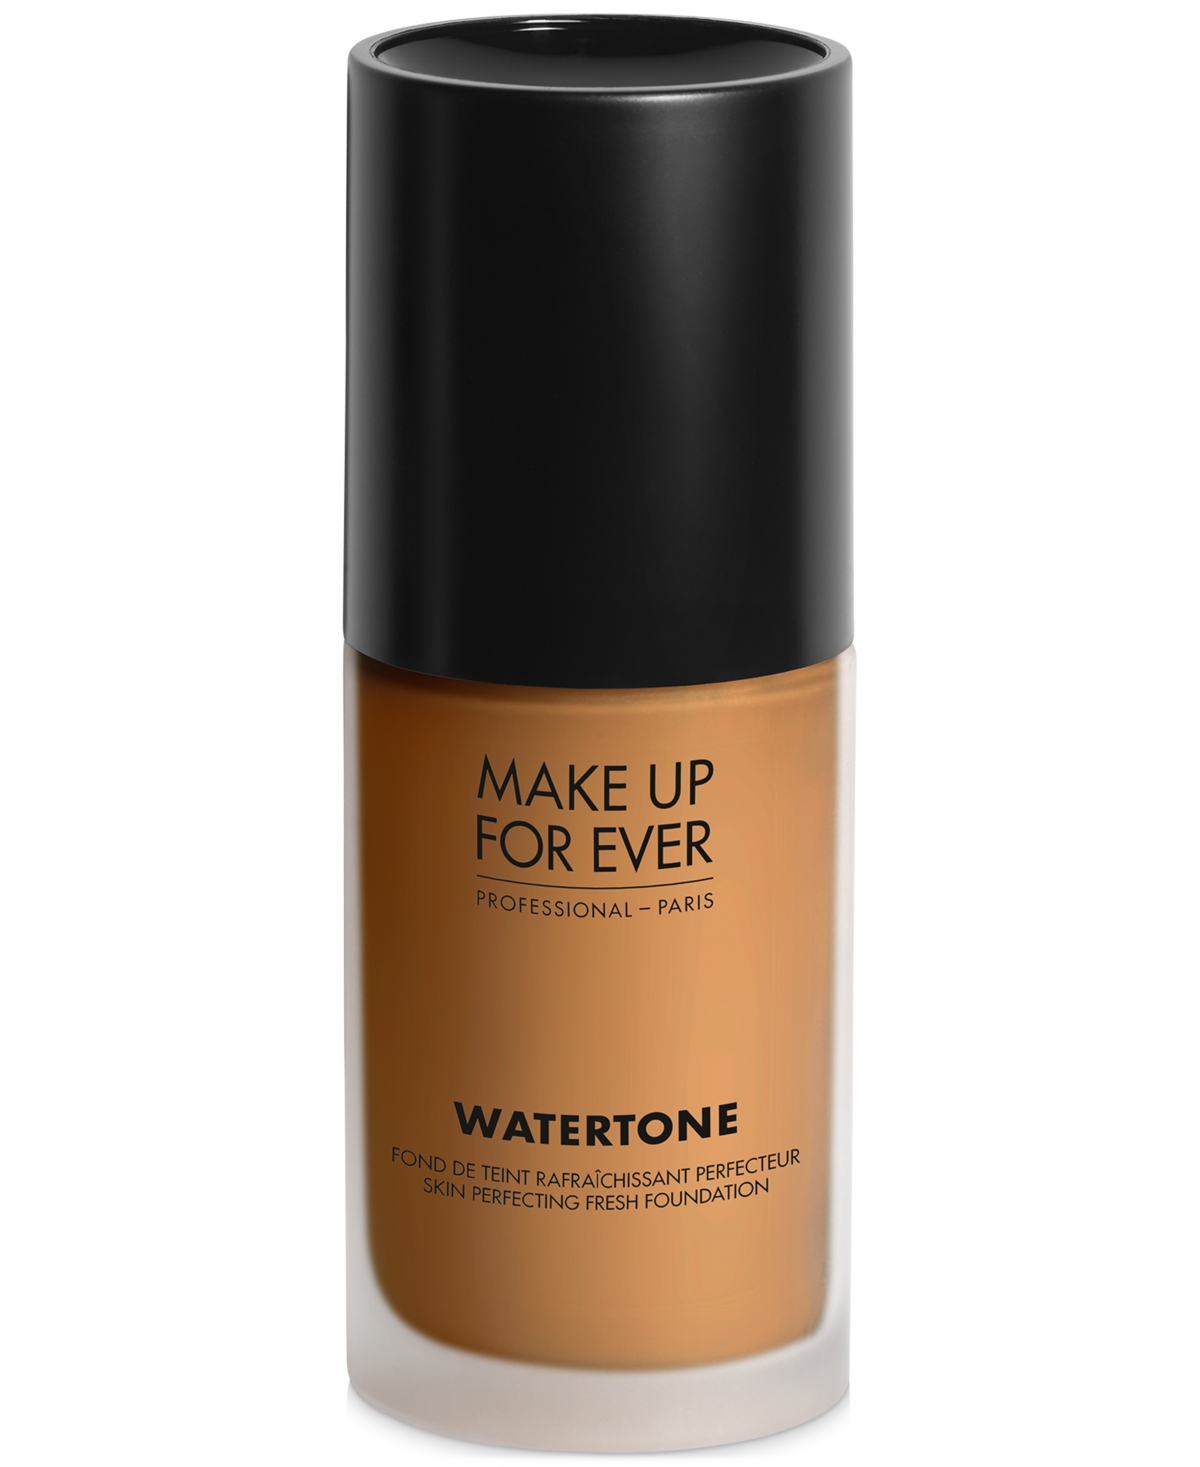 Make Up For Ever Watertone Skin-perfecting Foundation In Tan,beige